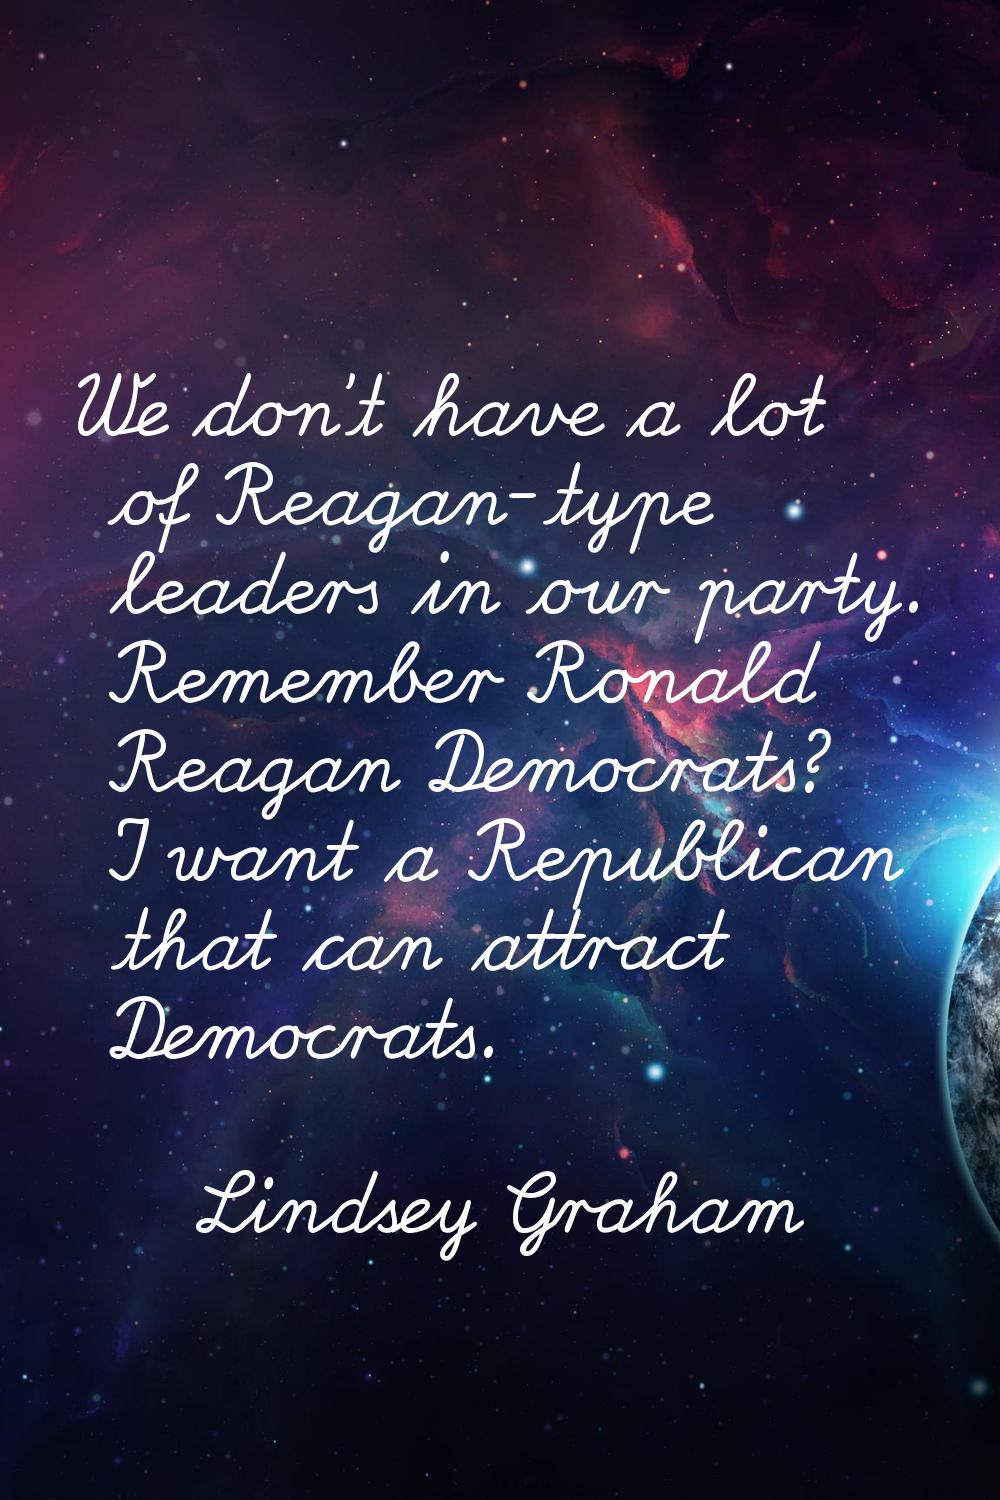 We don't have a lot of Reagan-type leaders in our party. Remember Ronald Reagan Democrats? I want a